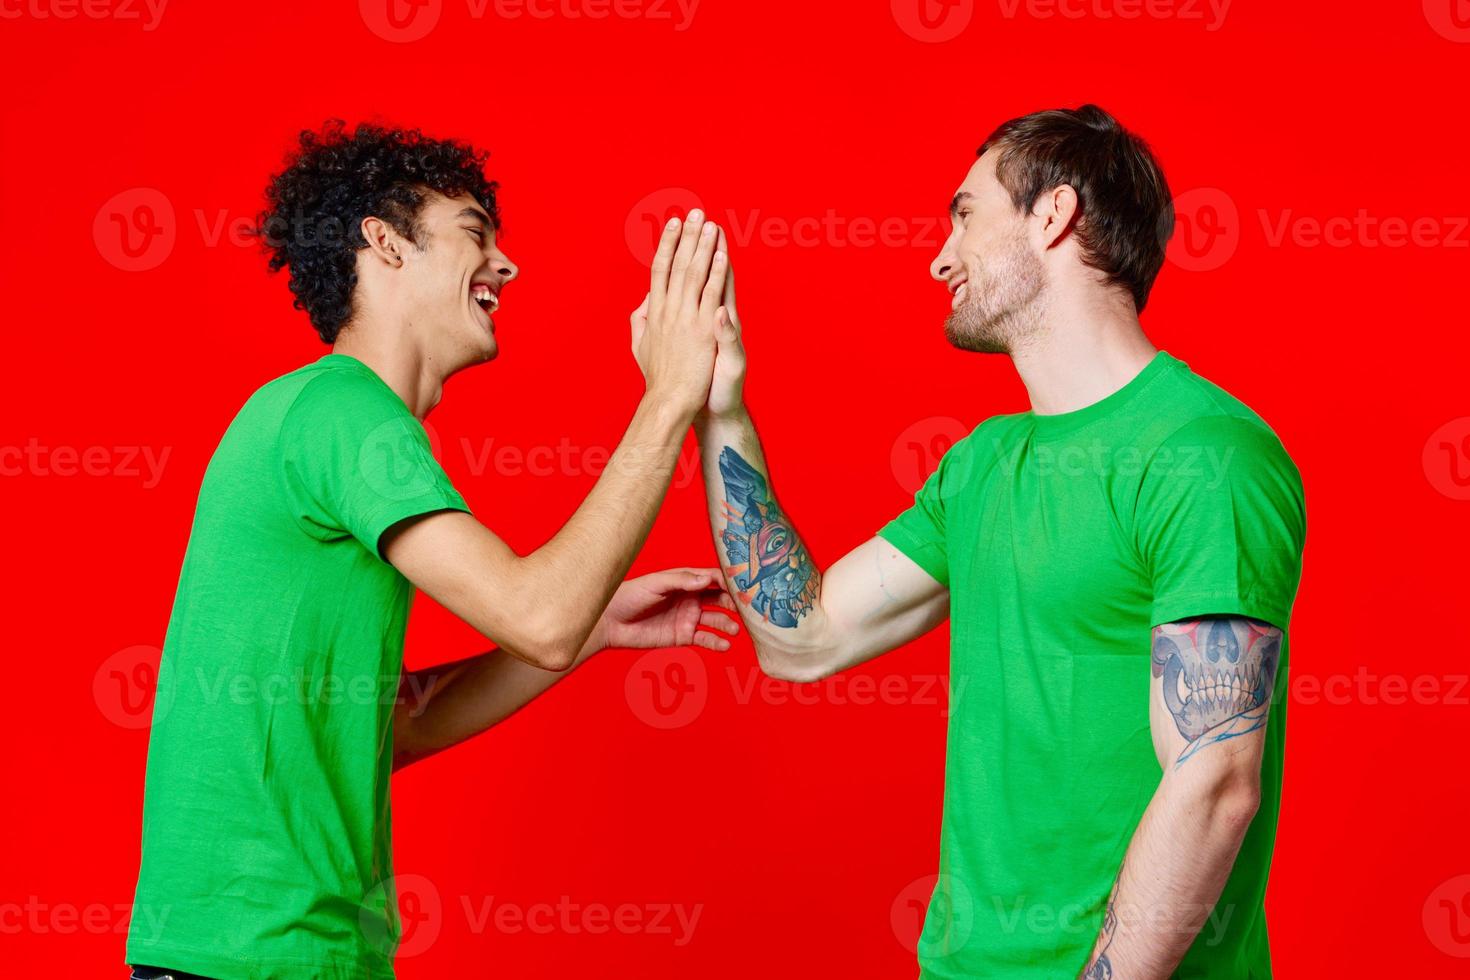 two friends in green t-shirts communication red background studio photo